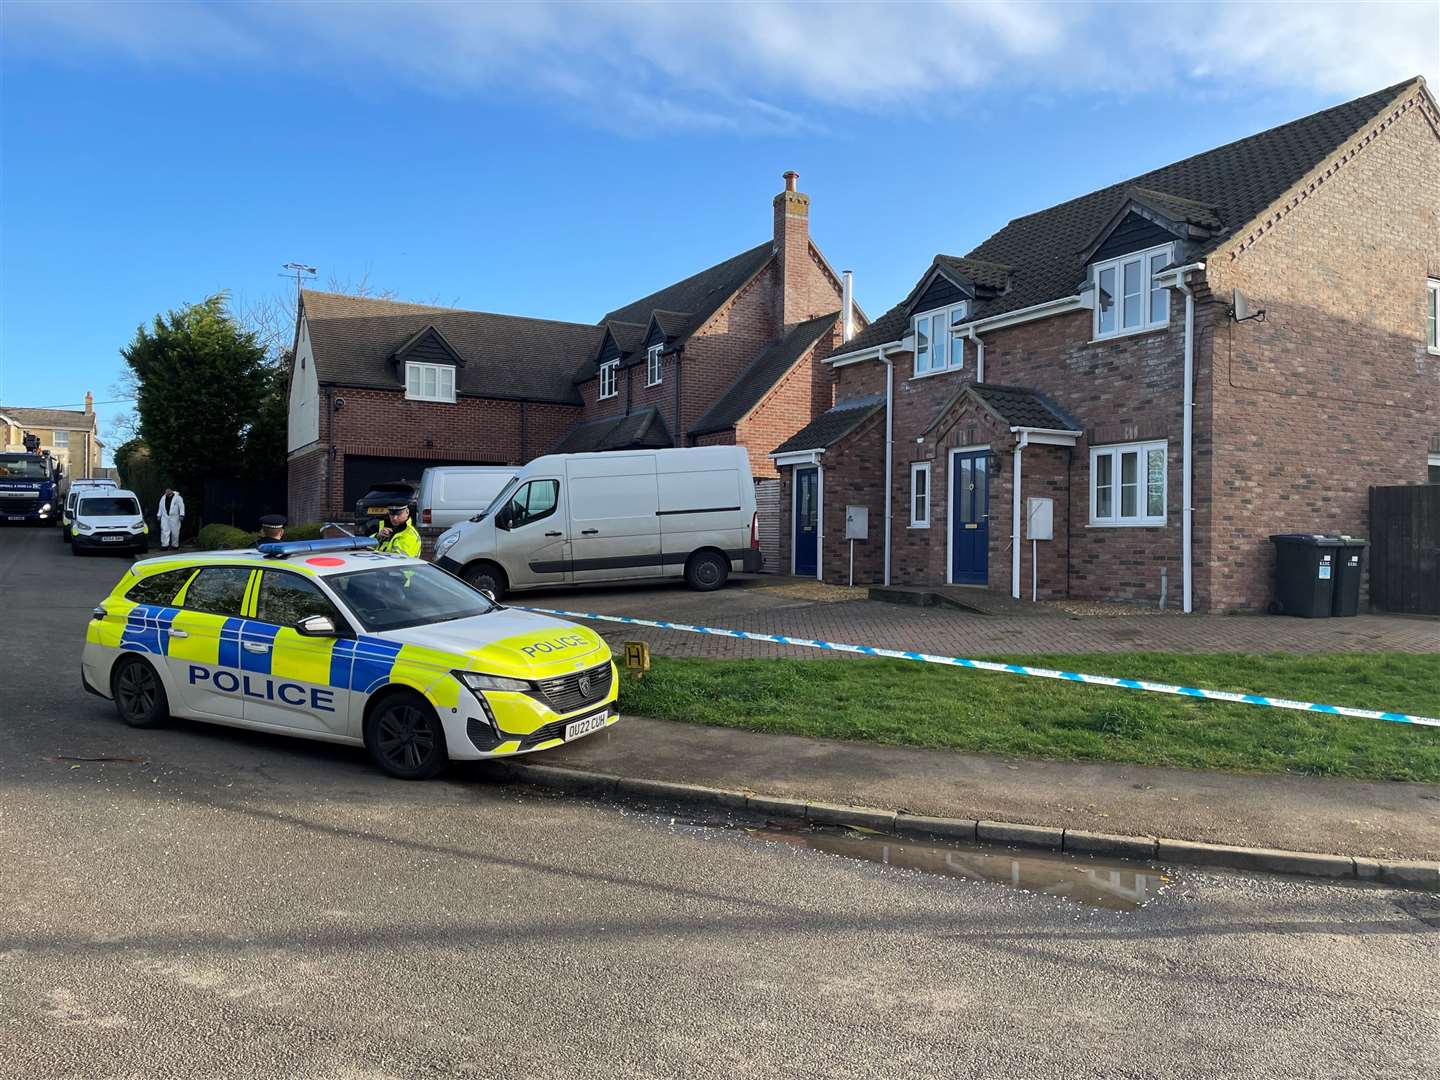 Police at the scene in The Row in Sutton, near Ely, Cambridgeshire, where police found the body of a 57-year-old man who had died from gunshot wounds (Sam Russell/PA)